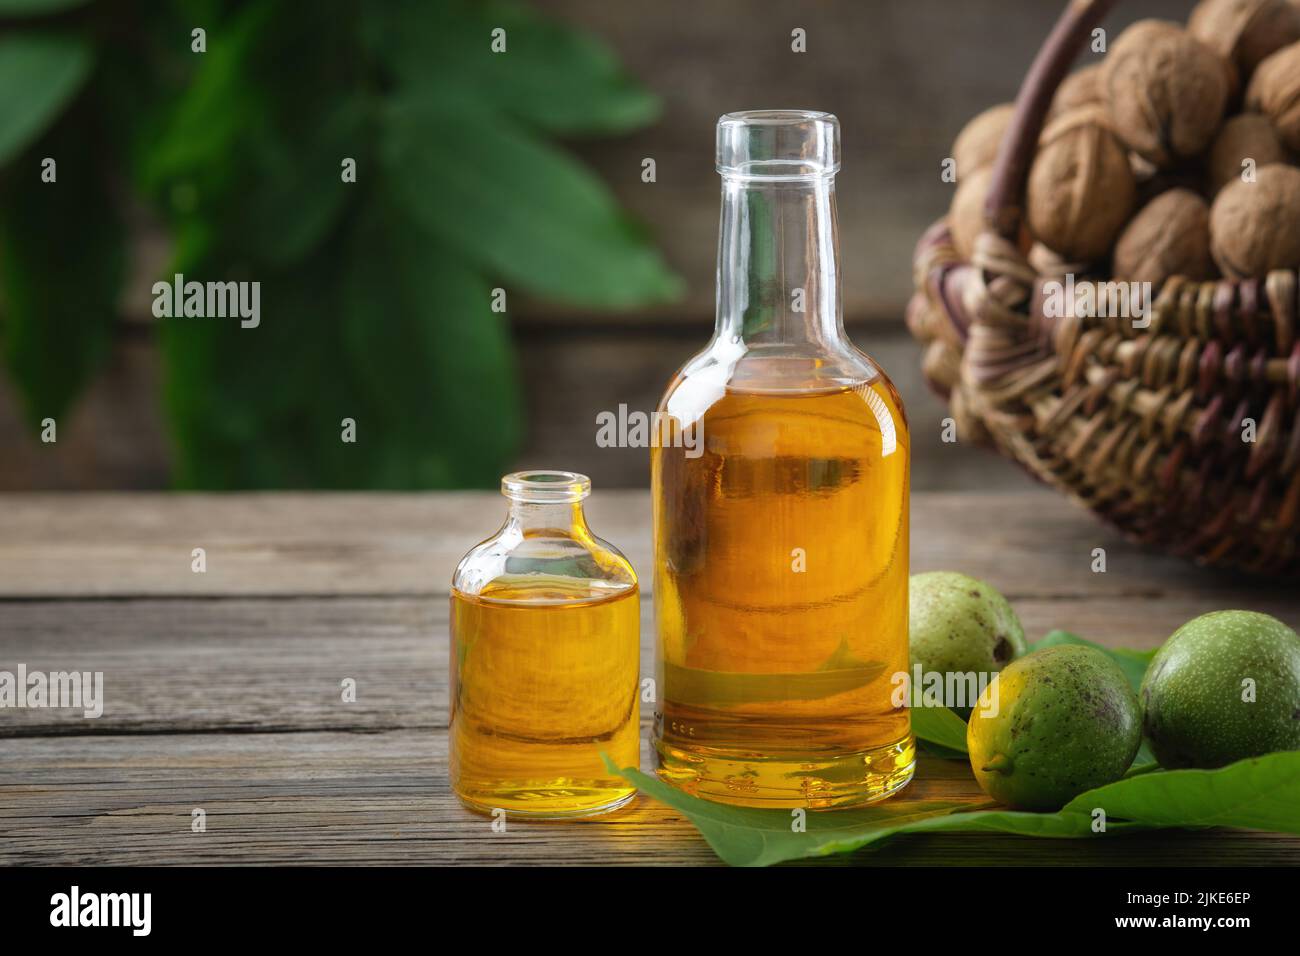 Bottles of essential nut oil, green and ripe walnuts. Basket of nuts on background. Stock Photo